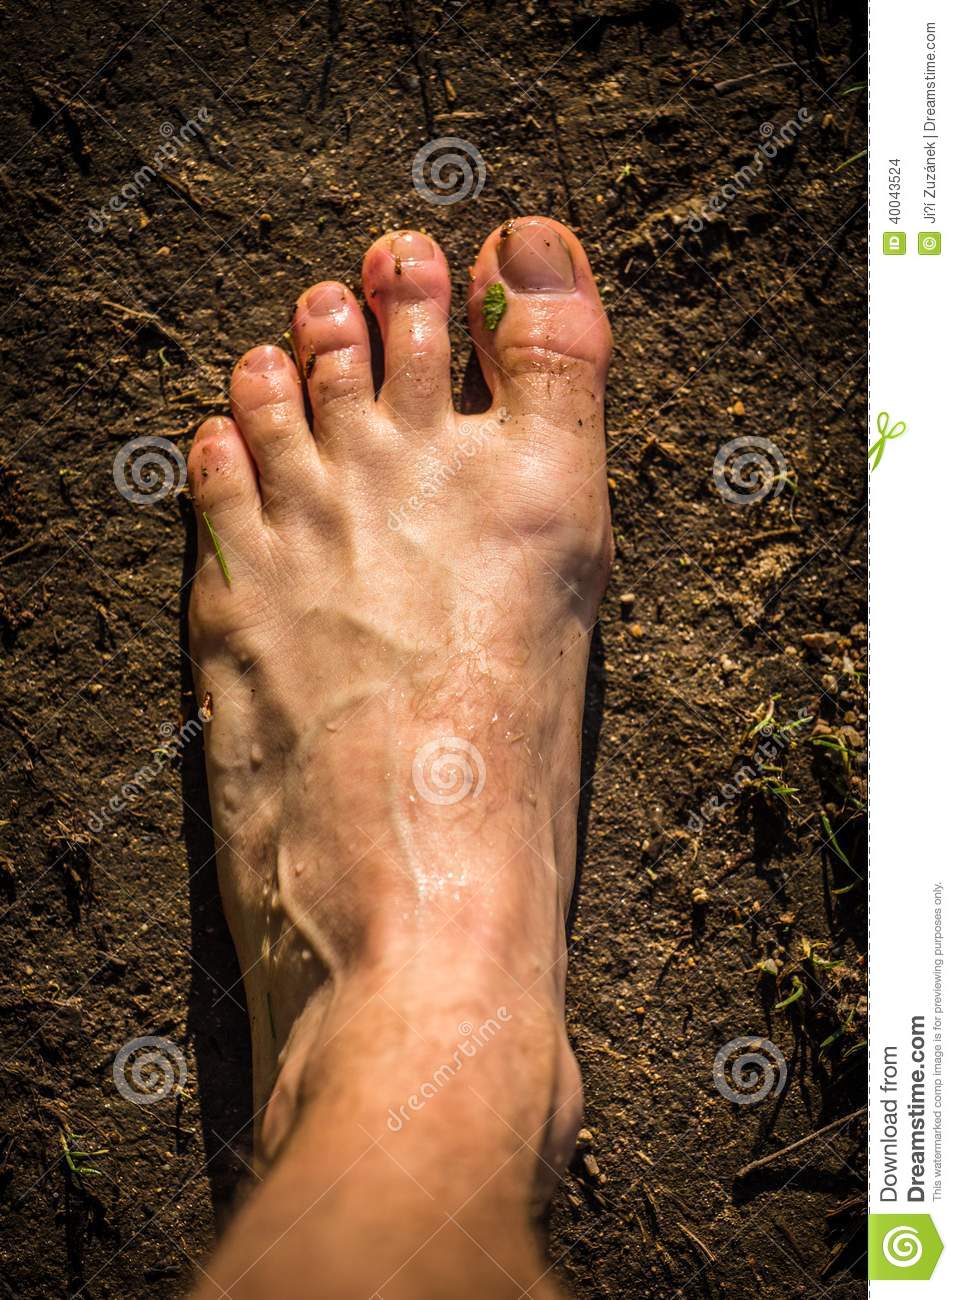 Male Bare Feet On The Way Stock Photo   Image  40043524